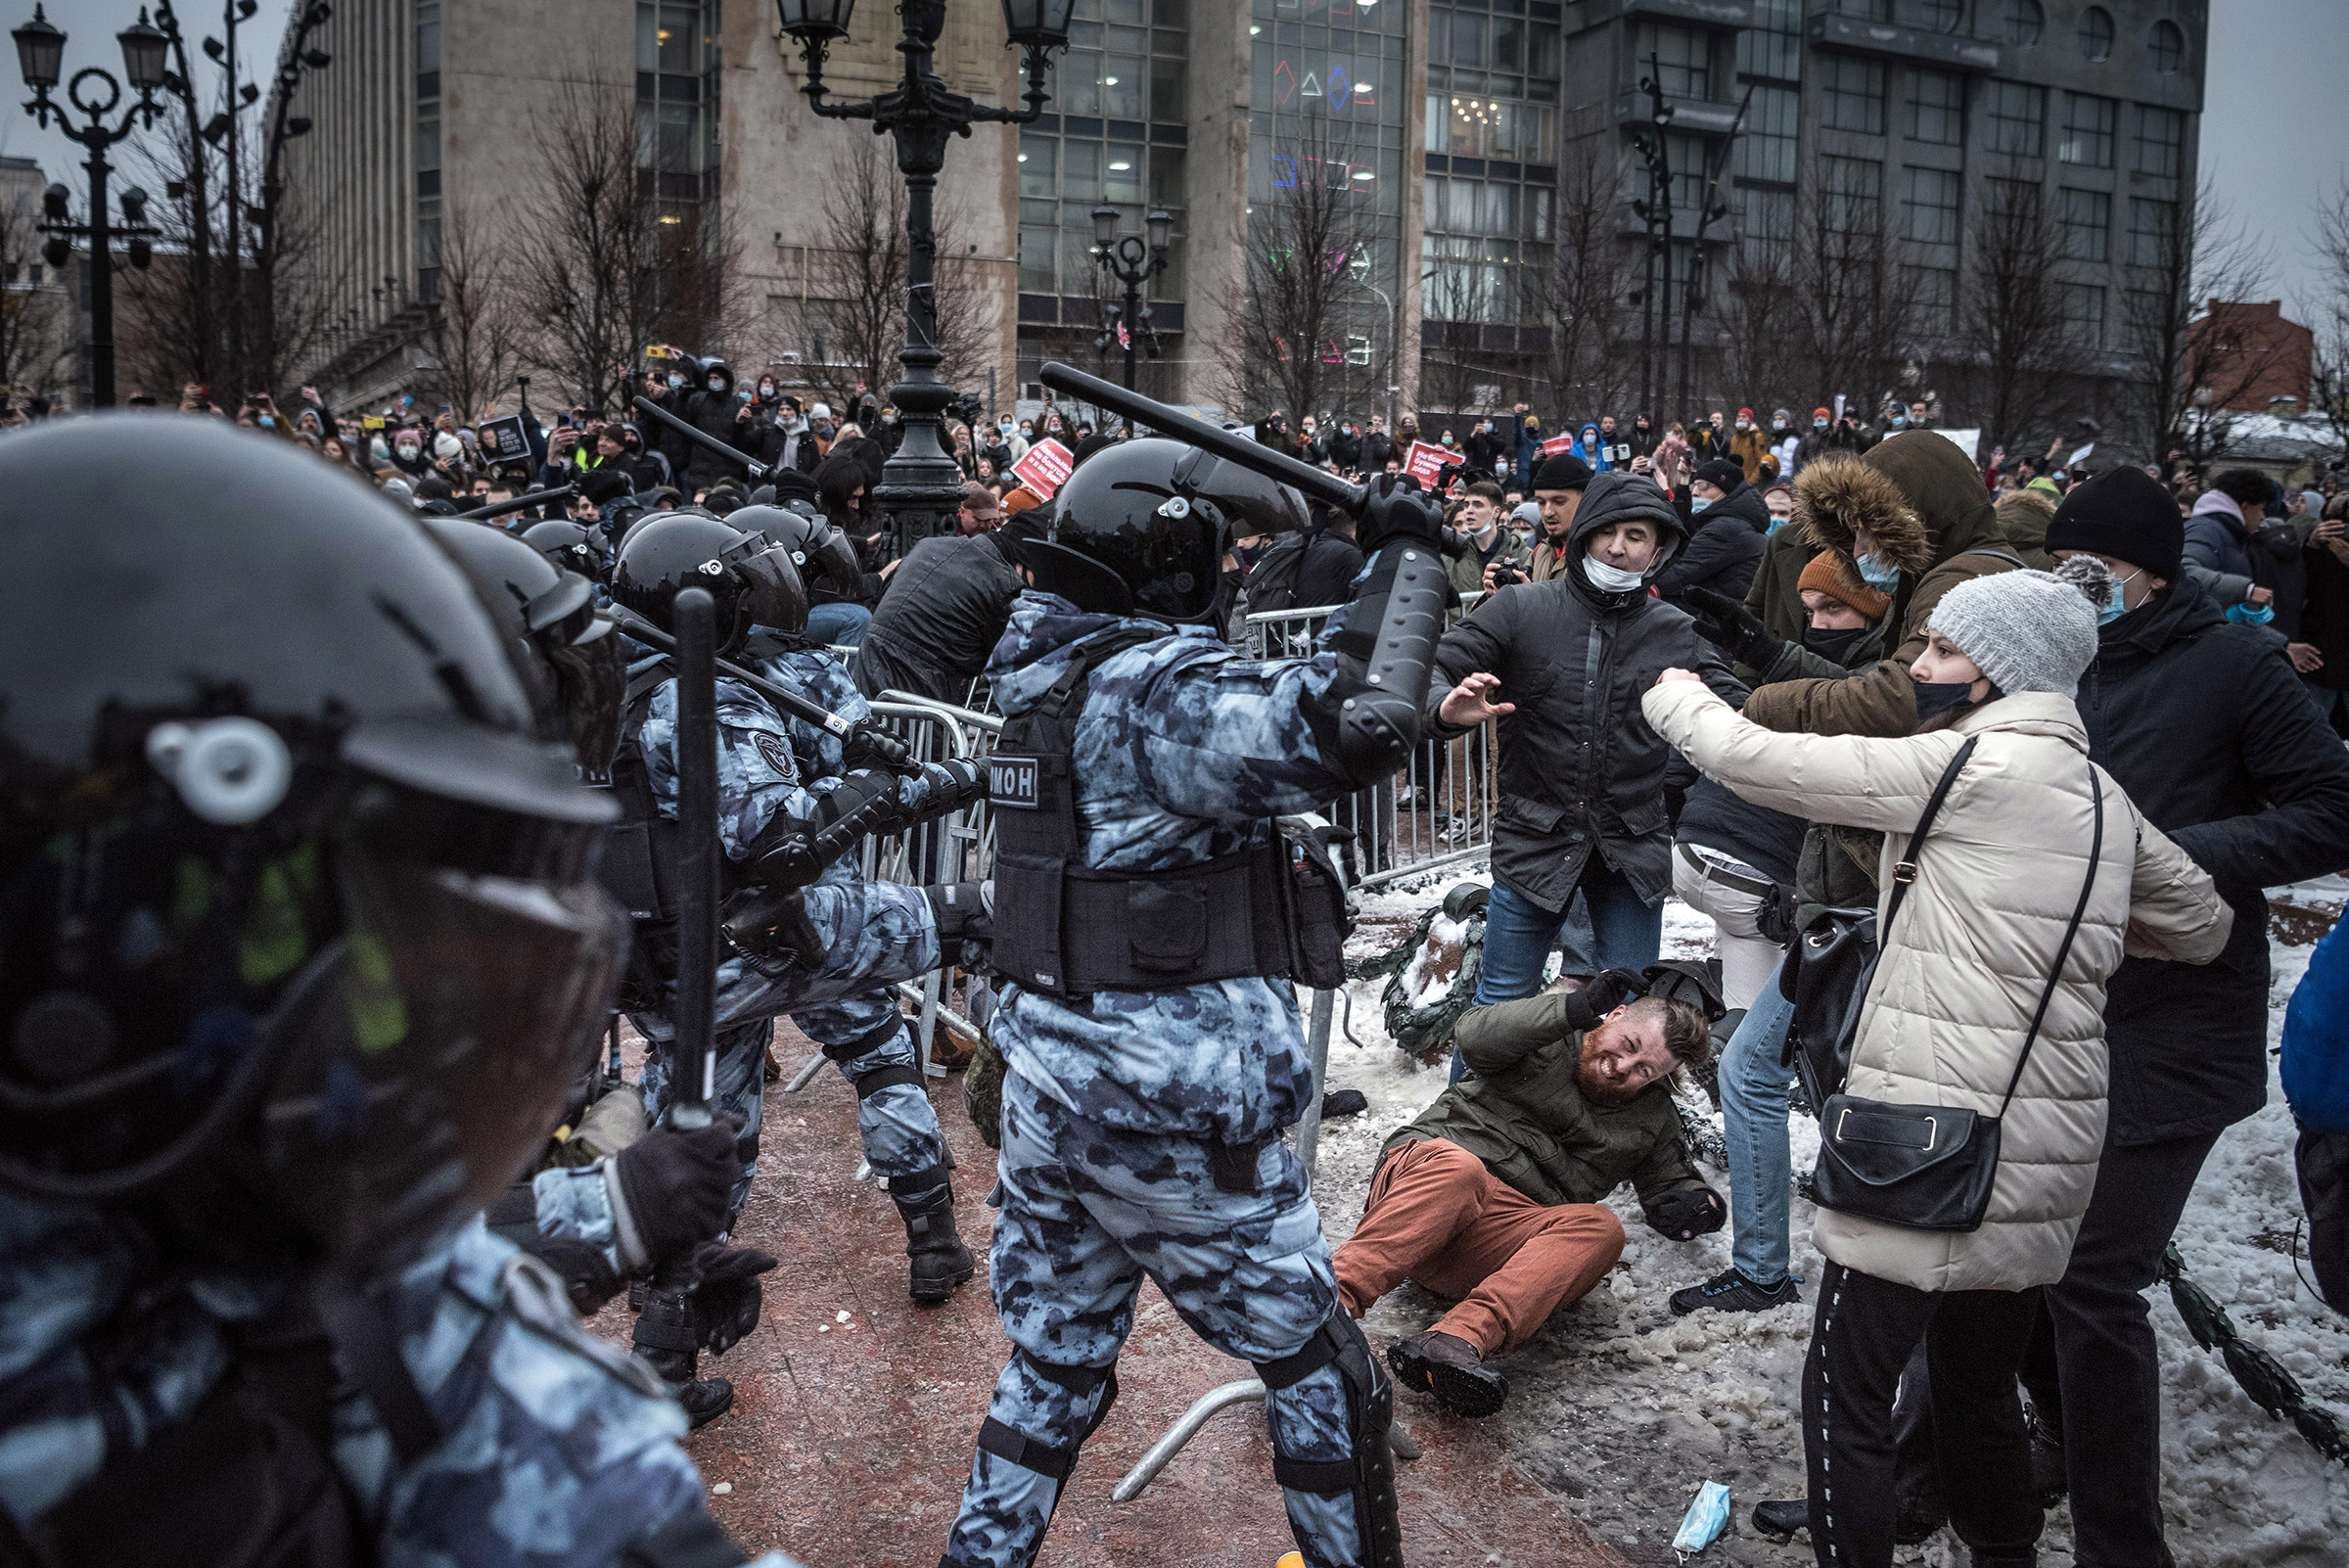 Riot police clash with demonstrators on Jan. 23, 2021, during a protest against Navalny’s jailing (Sergey Ponomarev—The New York Times/REDUX)